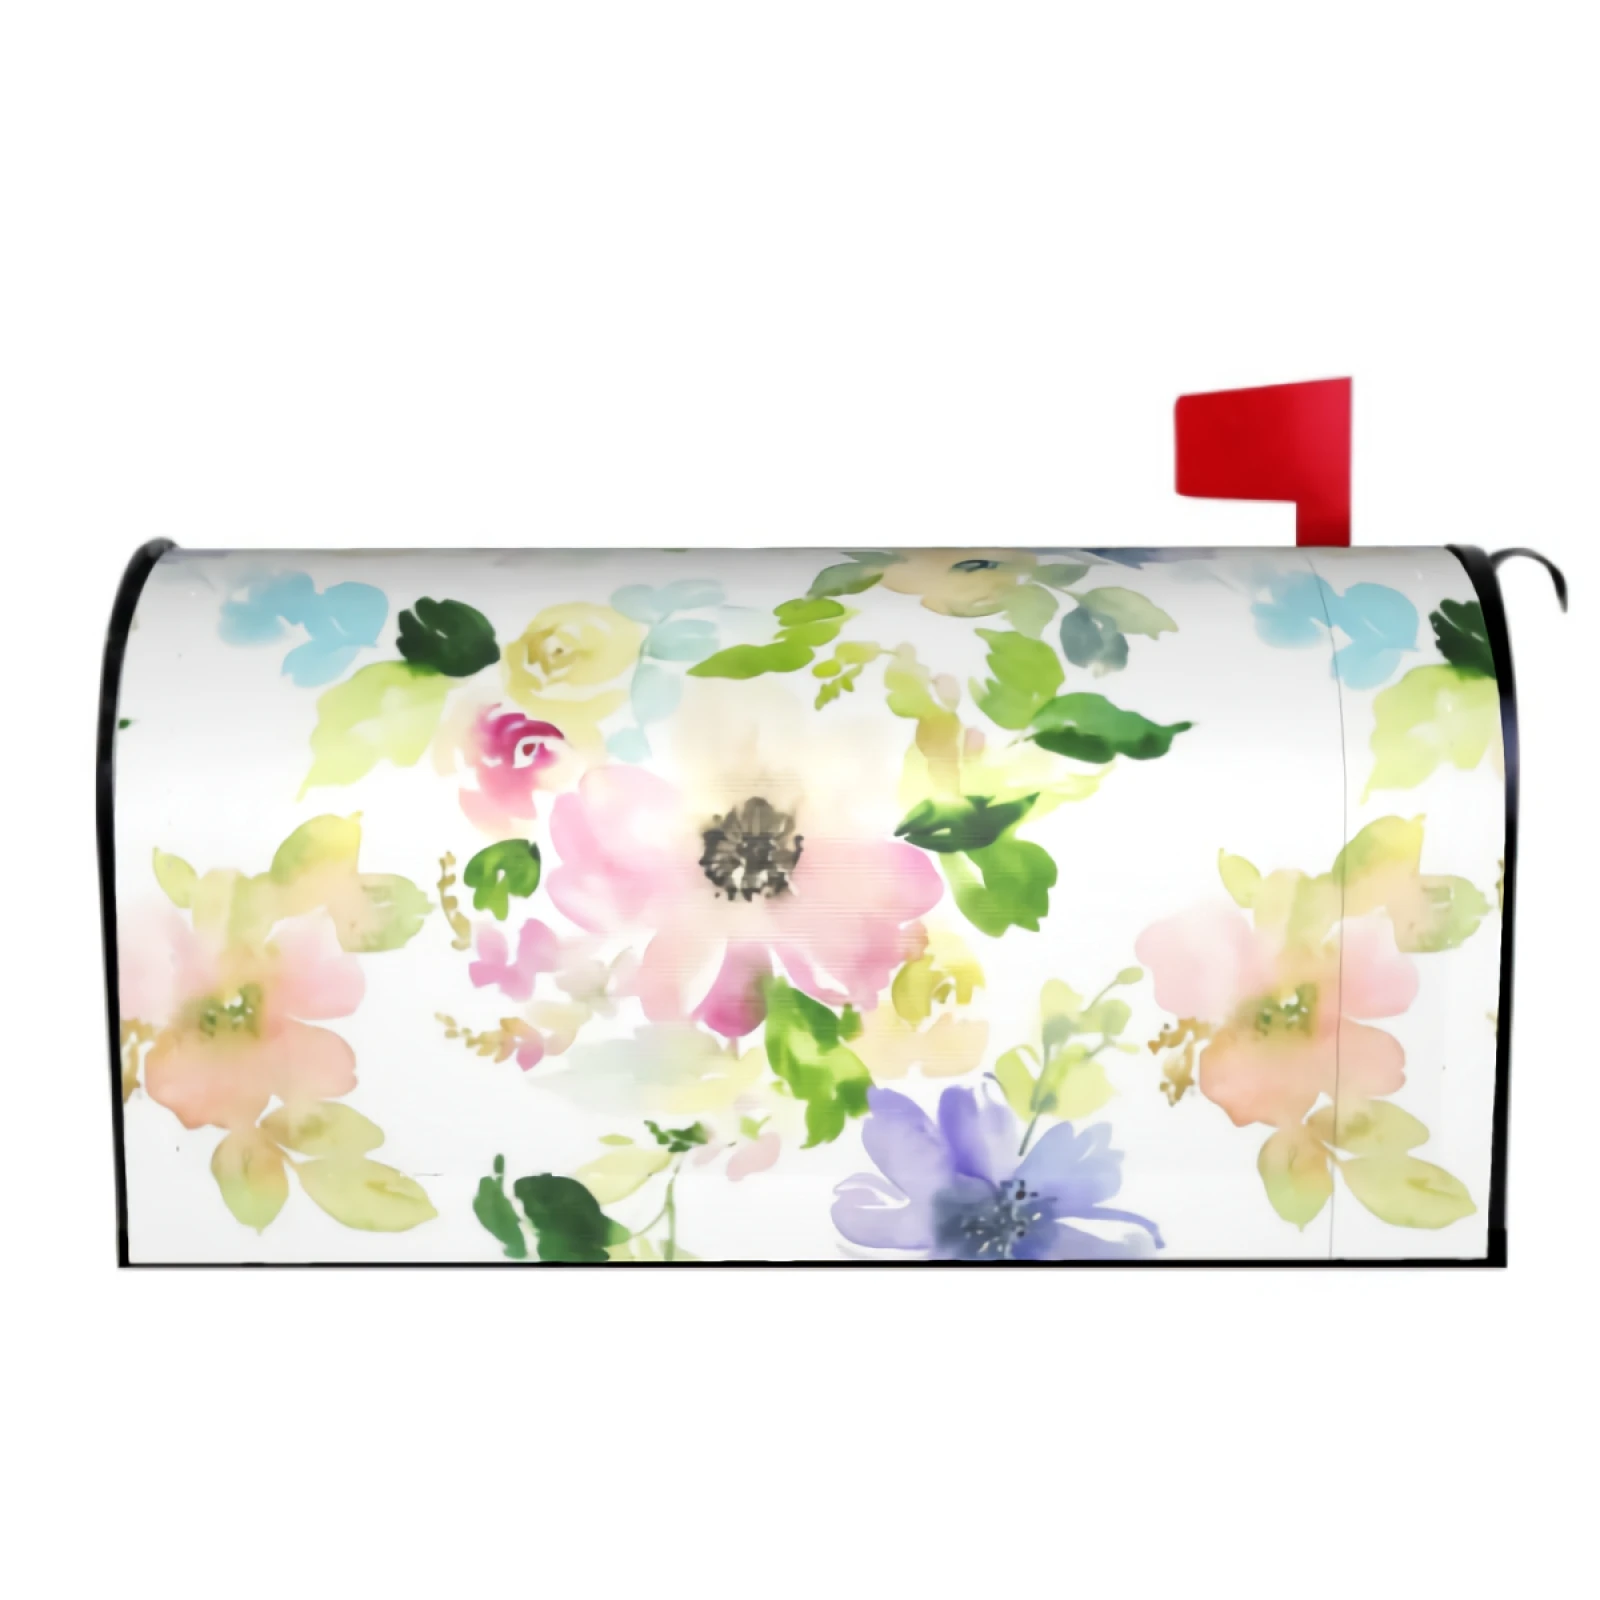 

Pink Blue Floral Farmhosue Decorative Mailboxes Wraps Post Letter Box Cover Standard Size 18x21 In for Outdoor Garden Yard